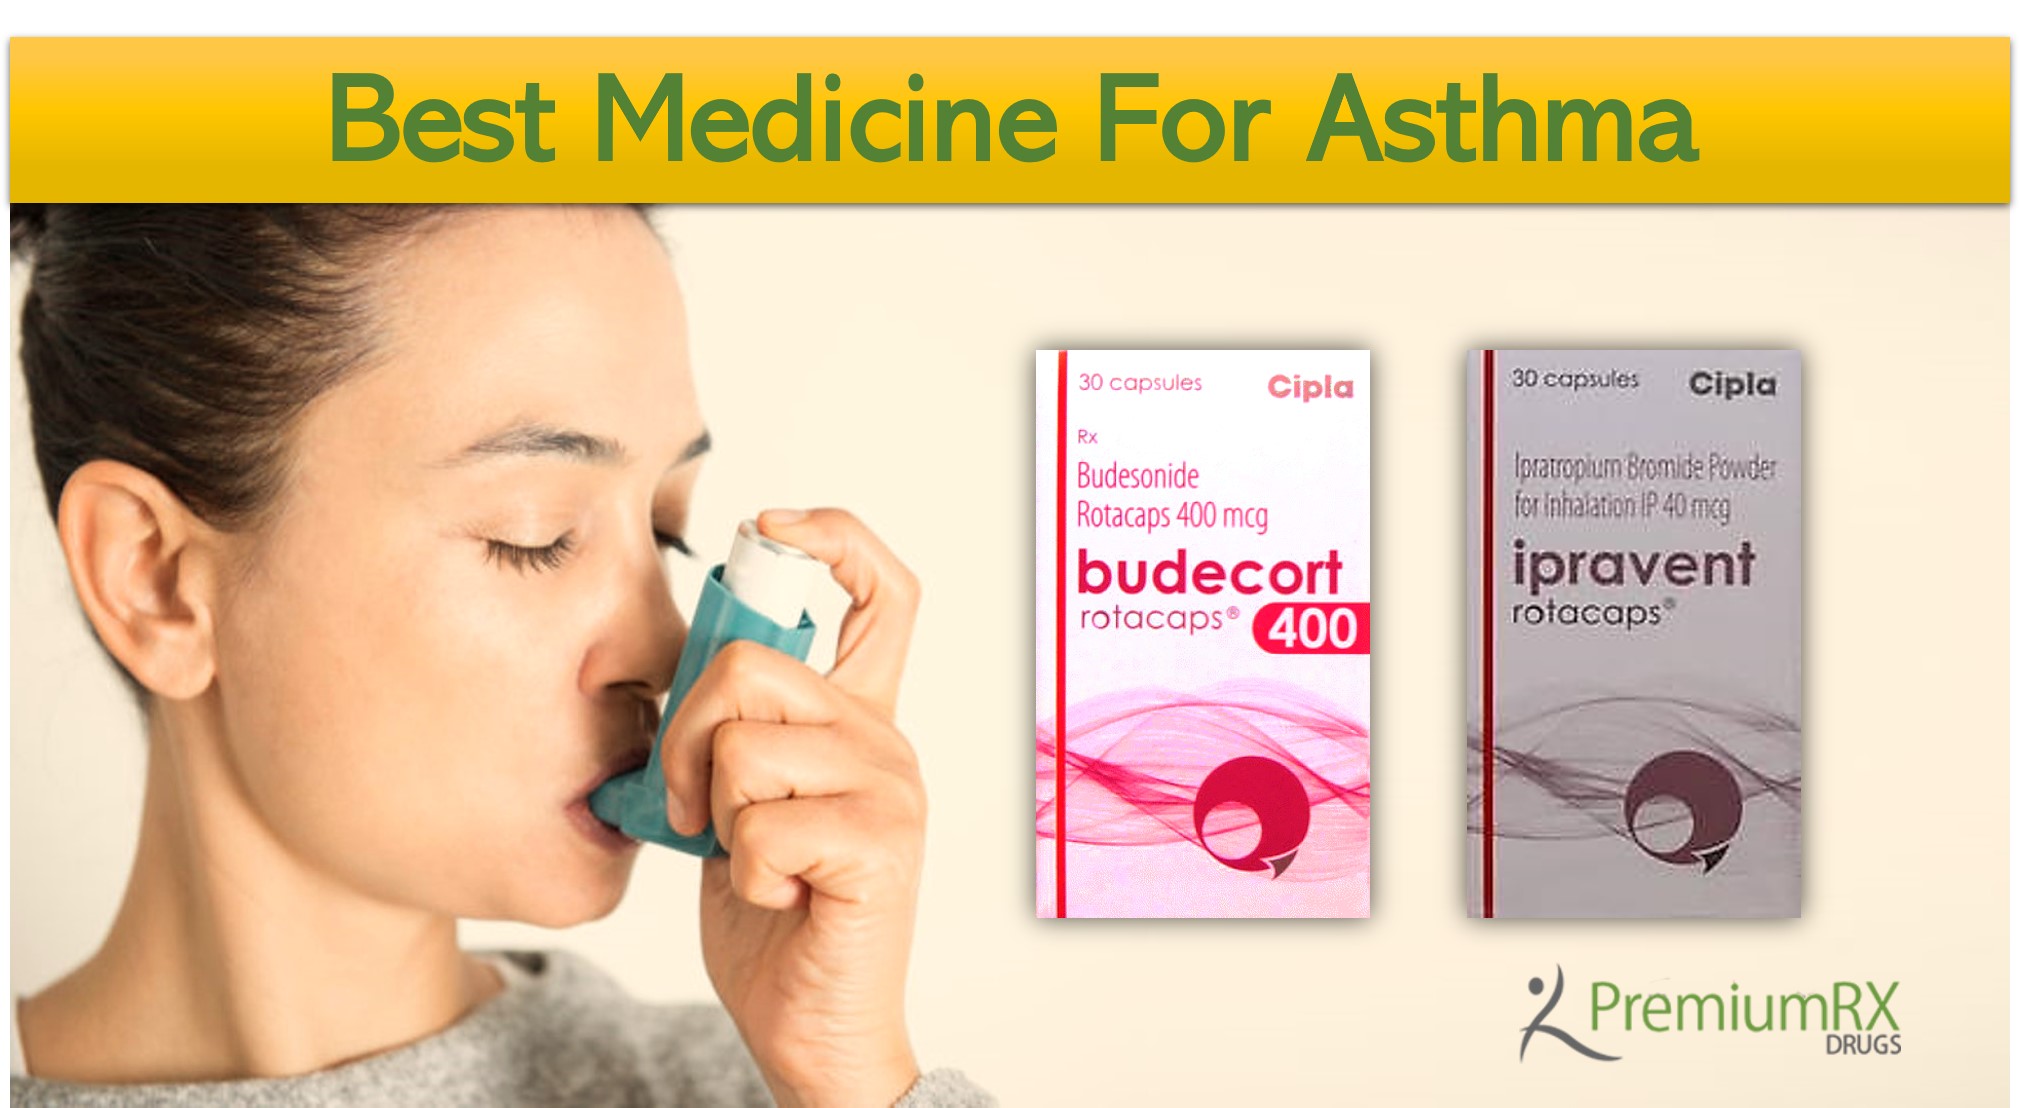 The Best Medicine For Asthma